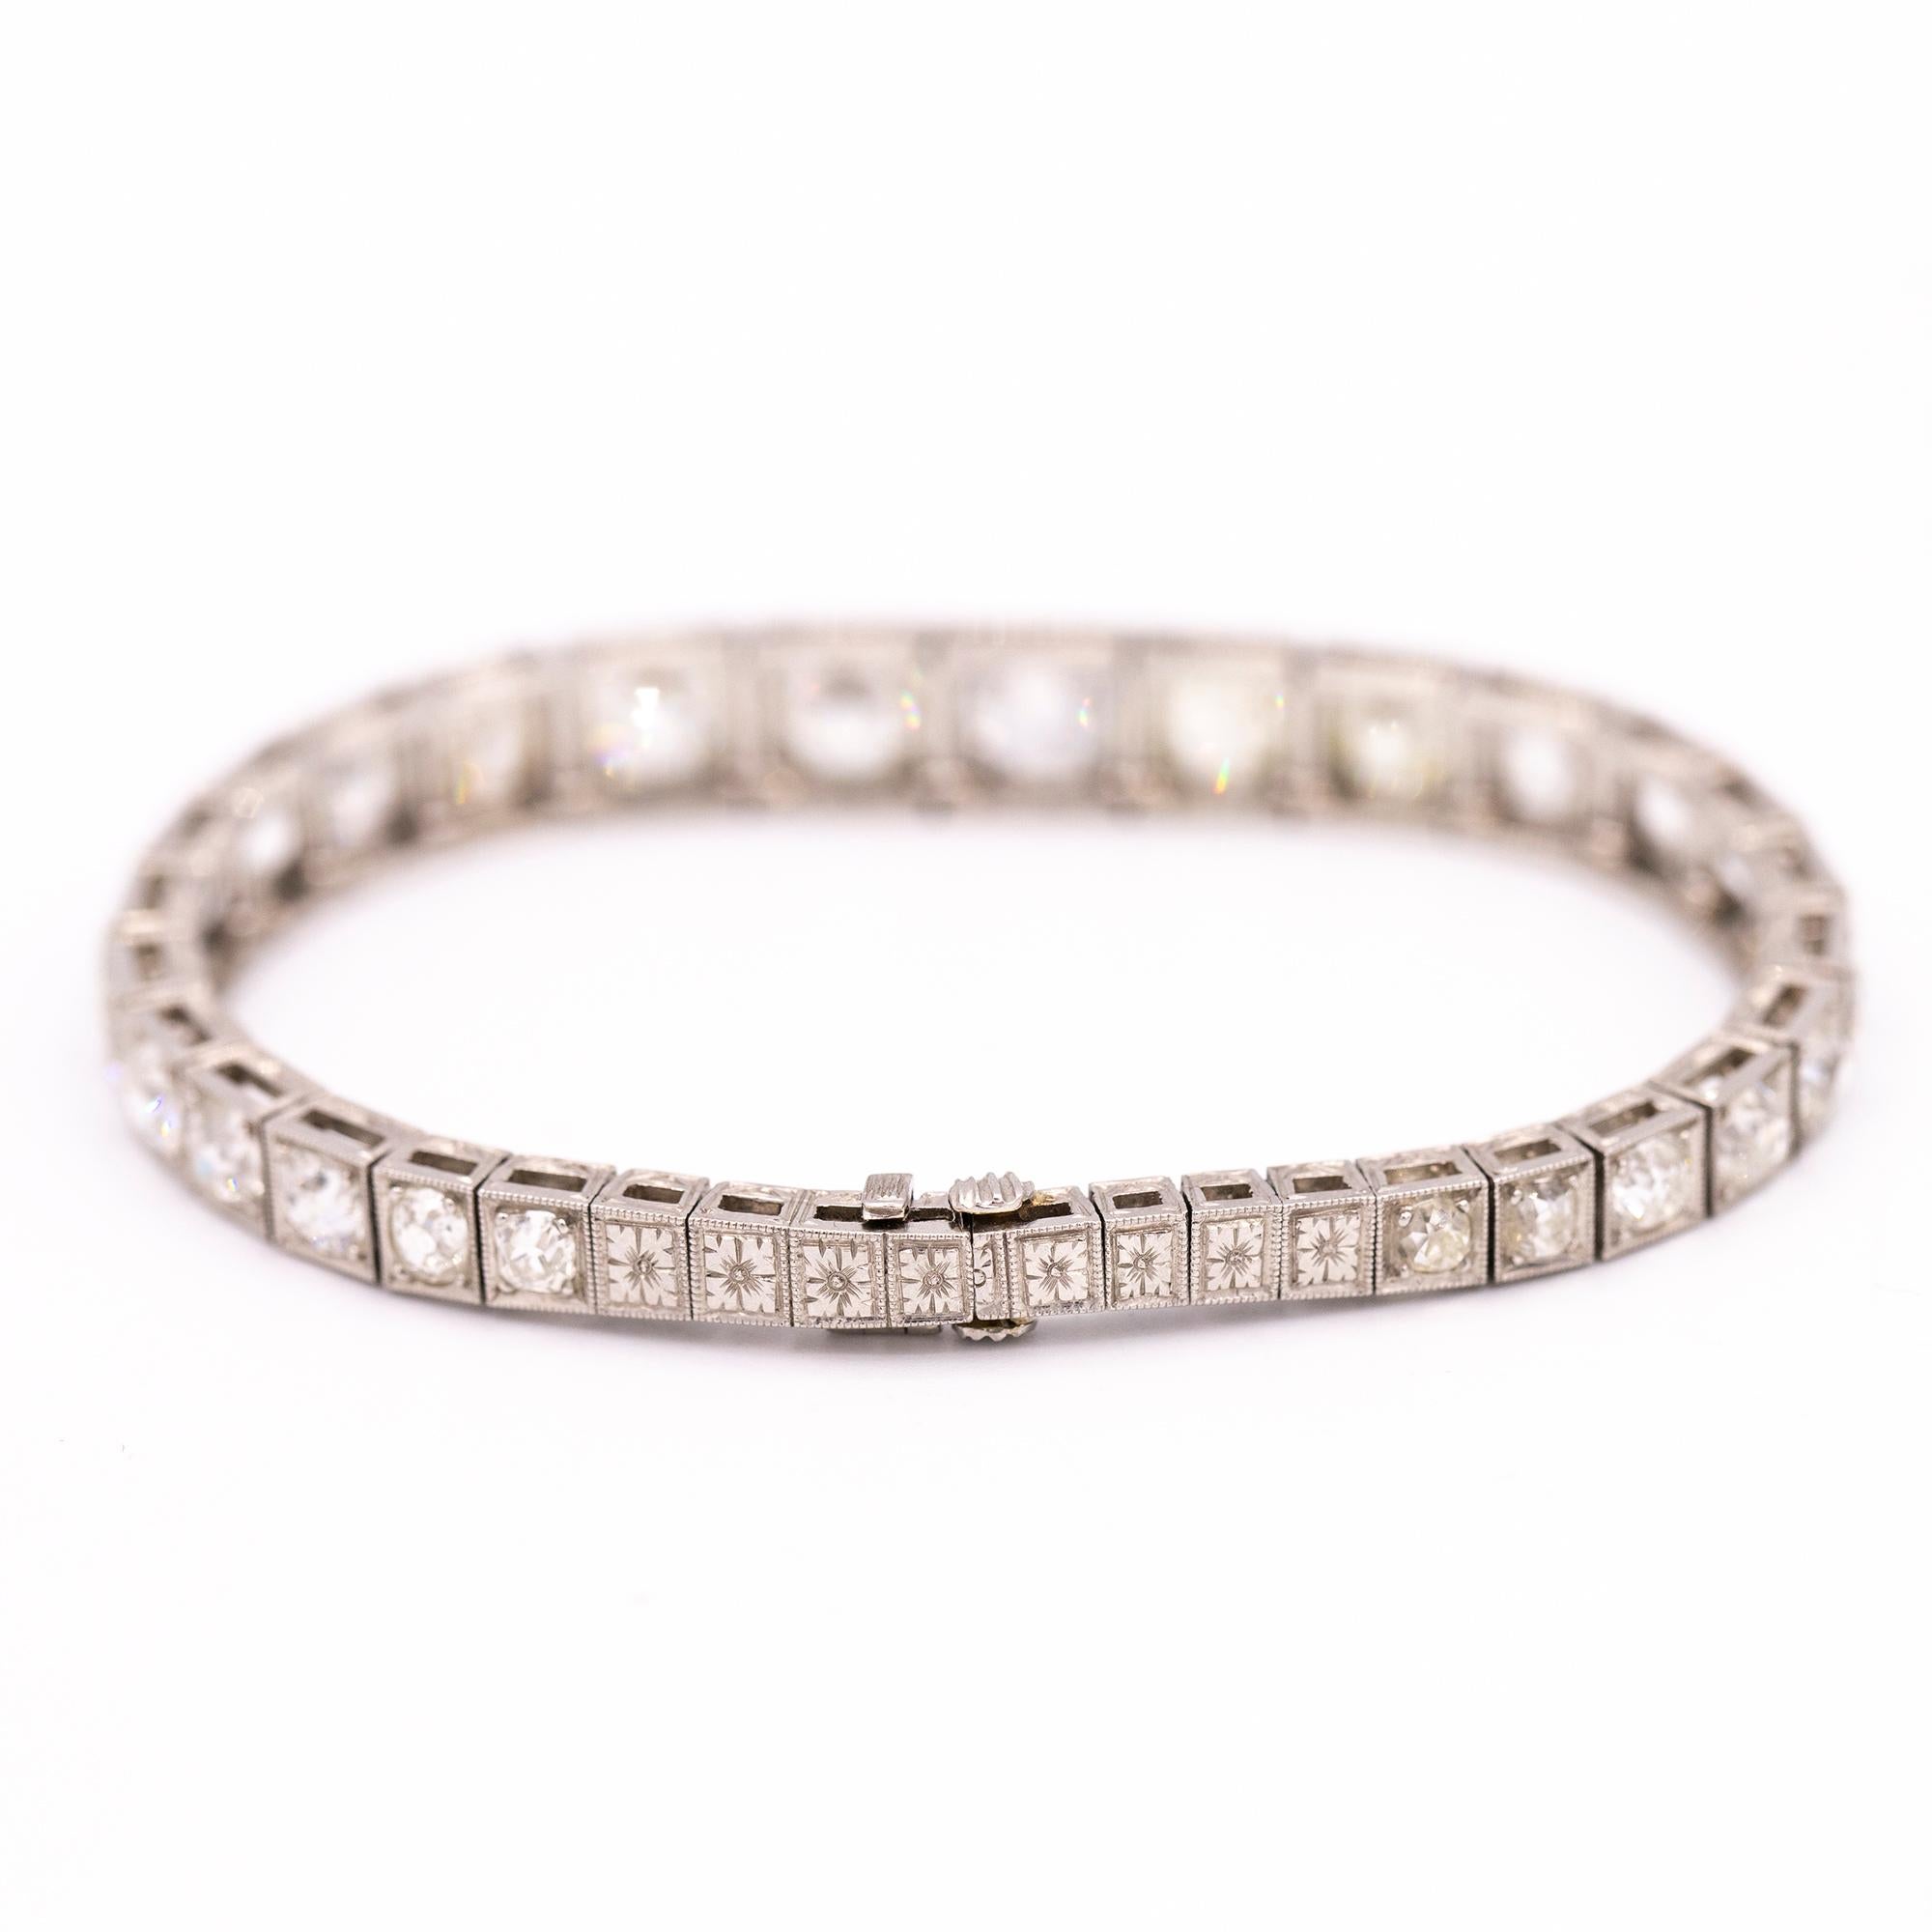 Platinum hand engraved Diamond bracelet from 1910. The bracelet is set with 26 Old Mine Cut diamonds that are graduated in size. The diamonds range from F-K in color and have a total carat weight of 12.50 carats. 
